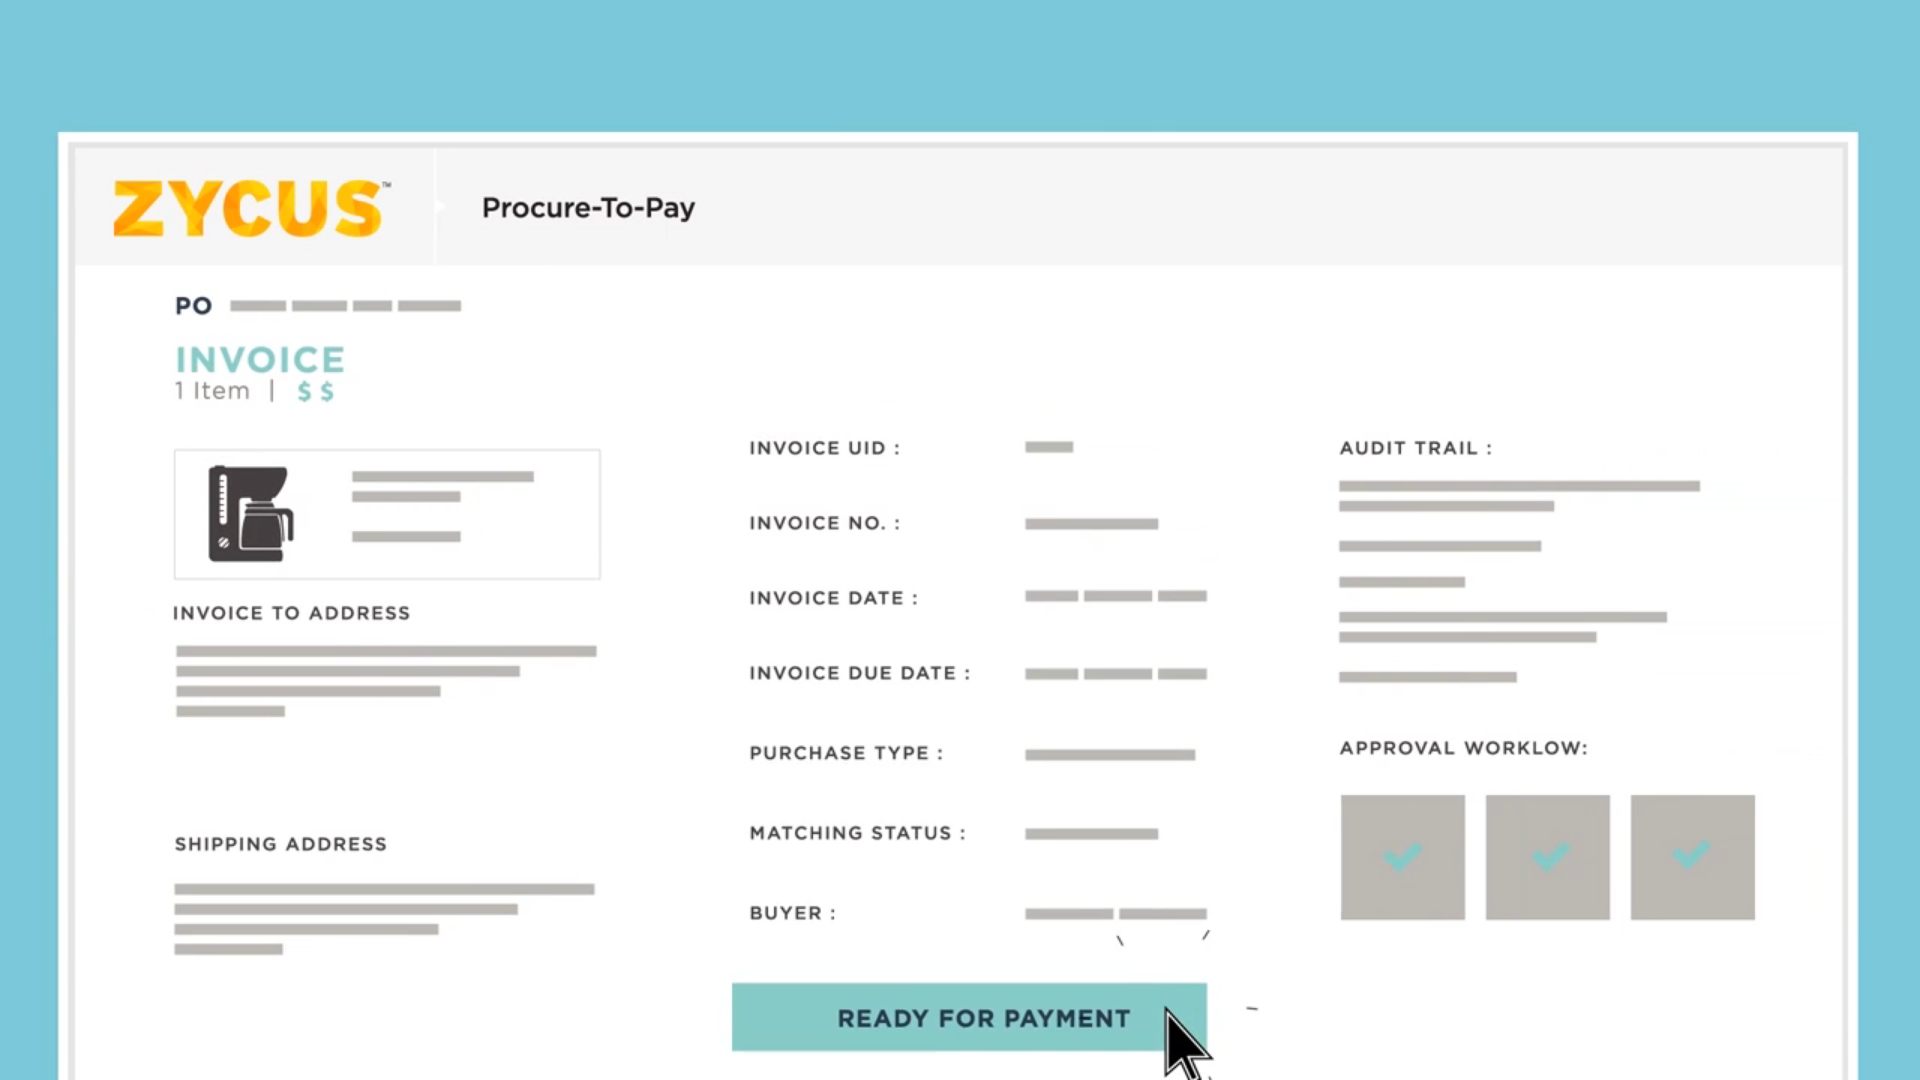 Procure-to-pay